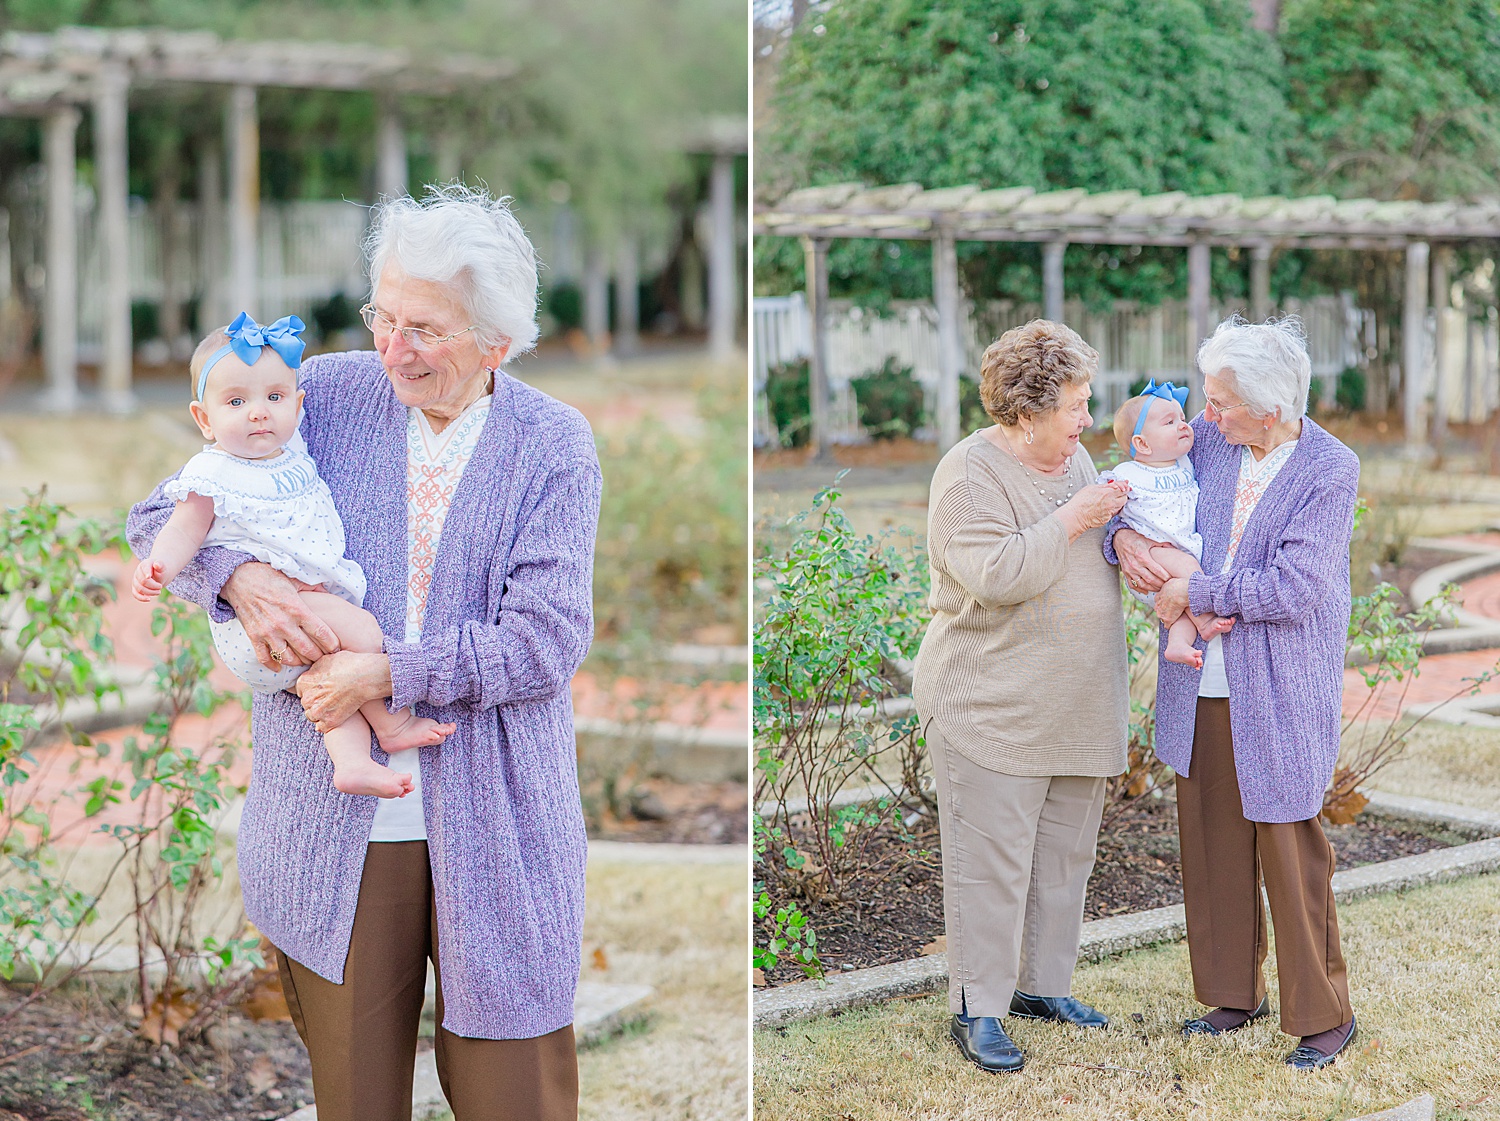 Two grandmothers hold their 6 month old granddaughter